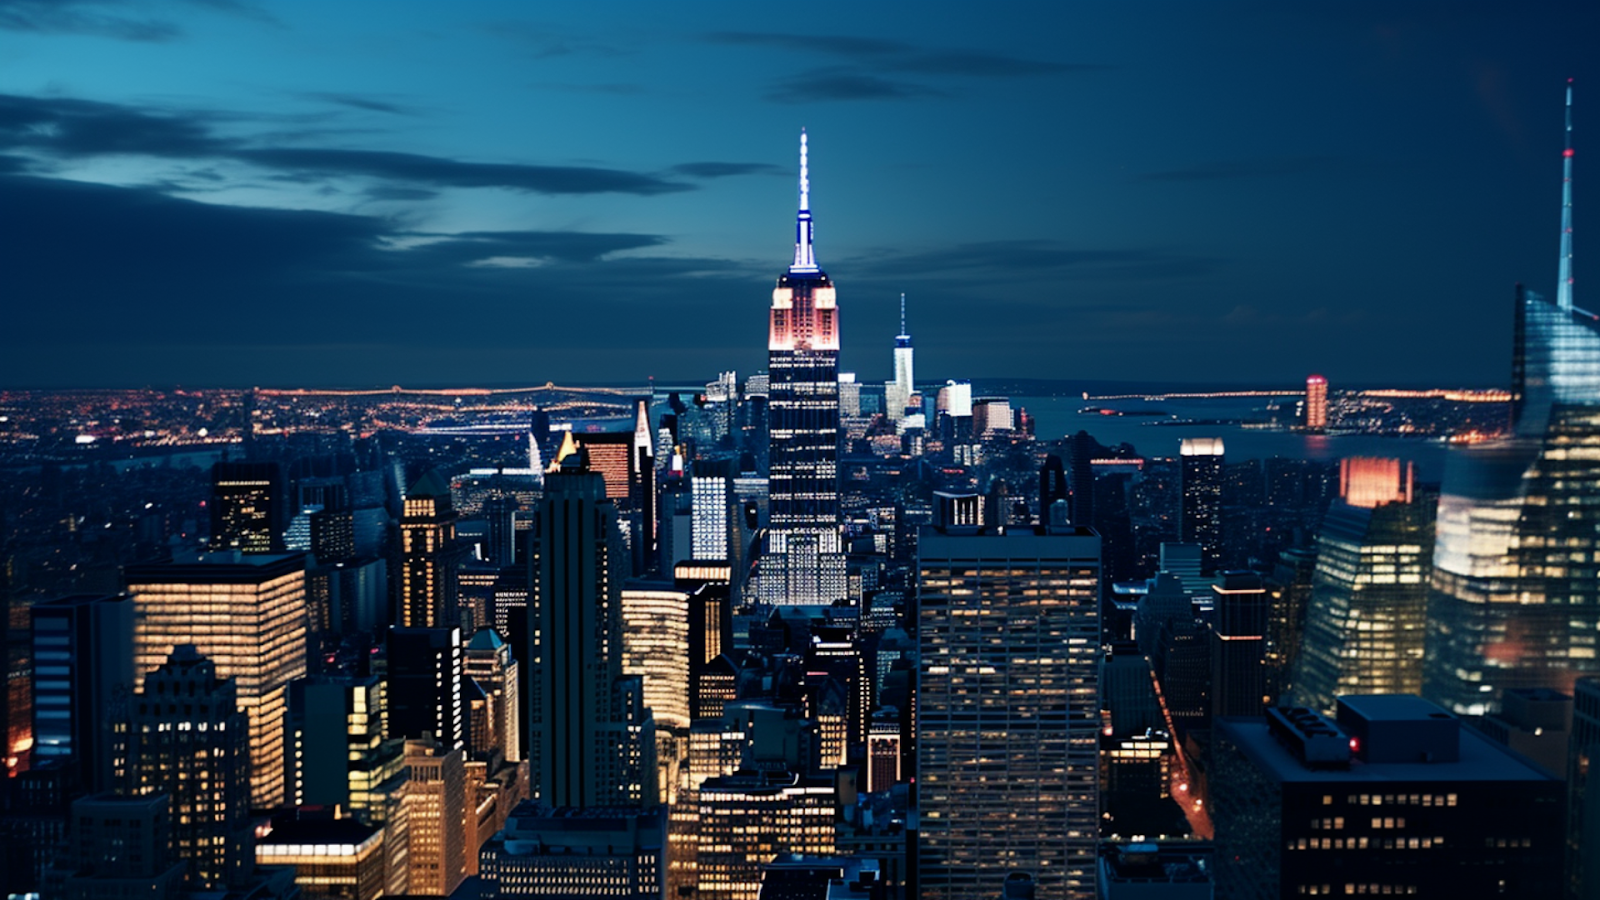 The Empire State Building illuminated against the New York City lights at night, showcasing the vibrant nocturnal architectural design.